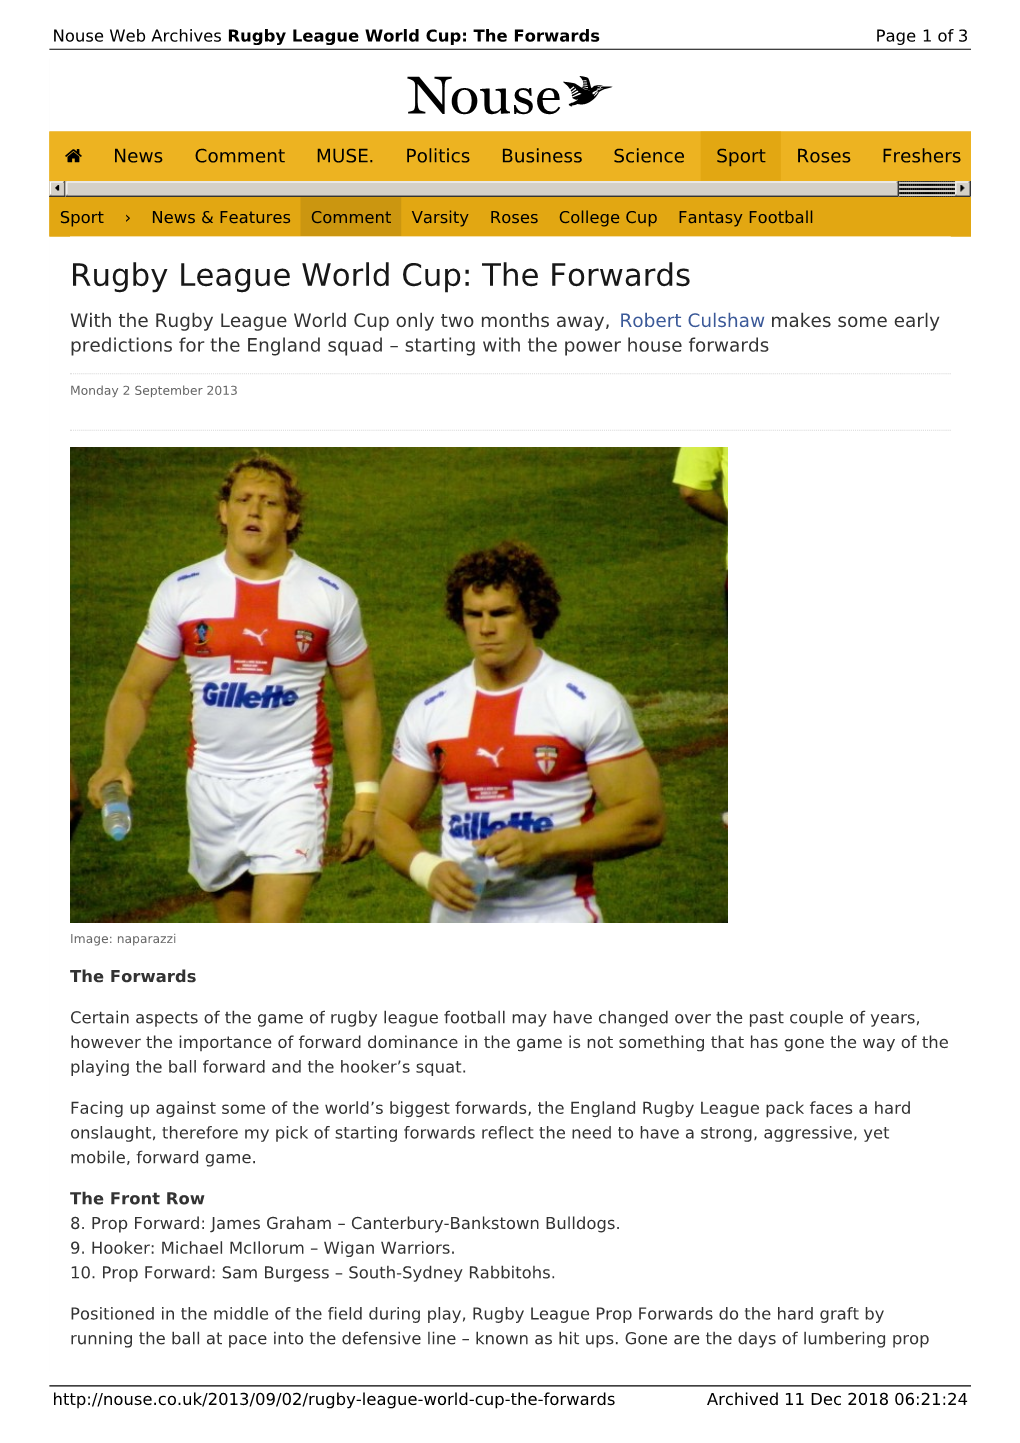 Rugby League World Cup: the Forwards | Nouse